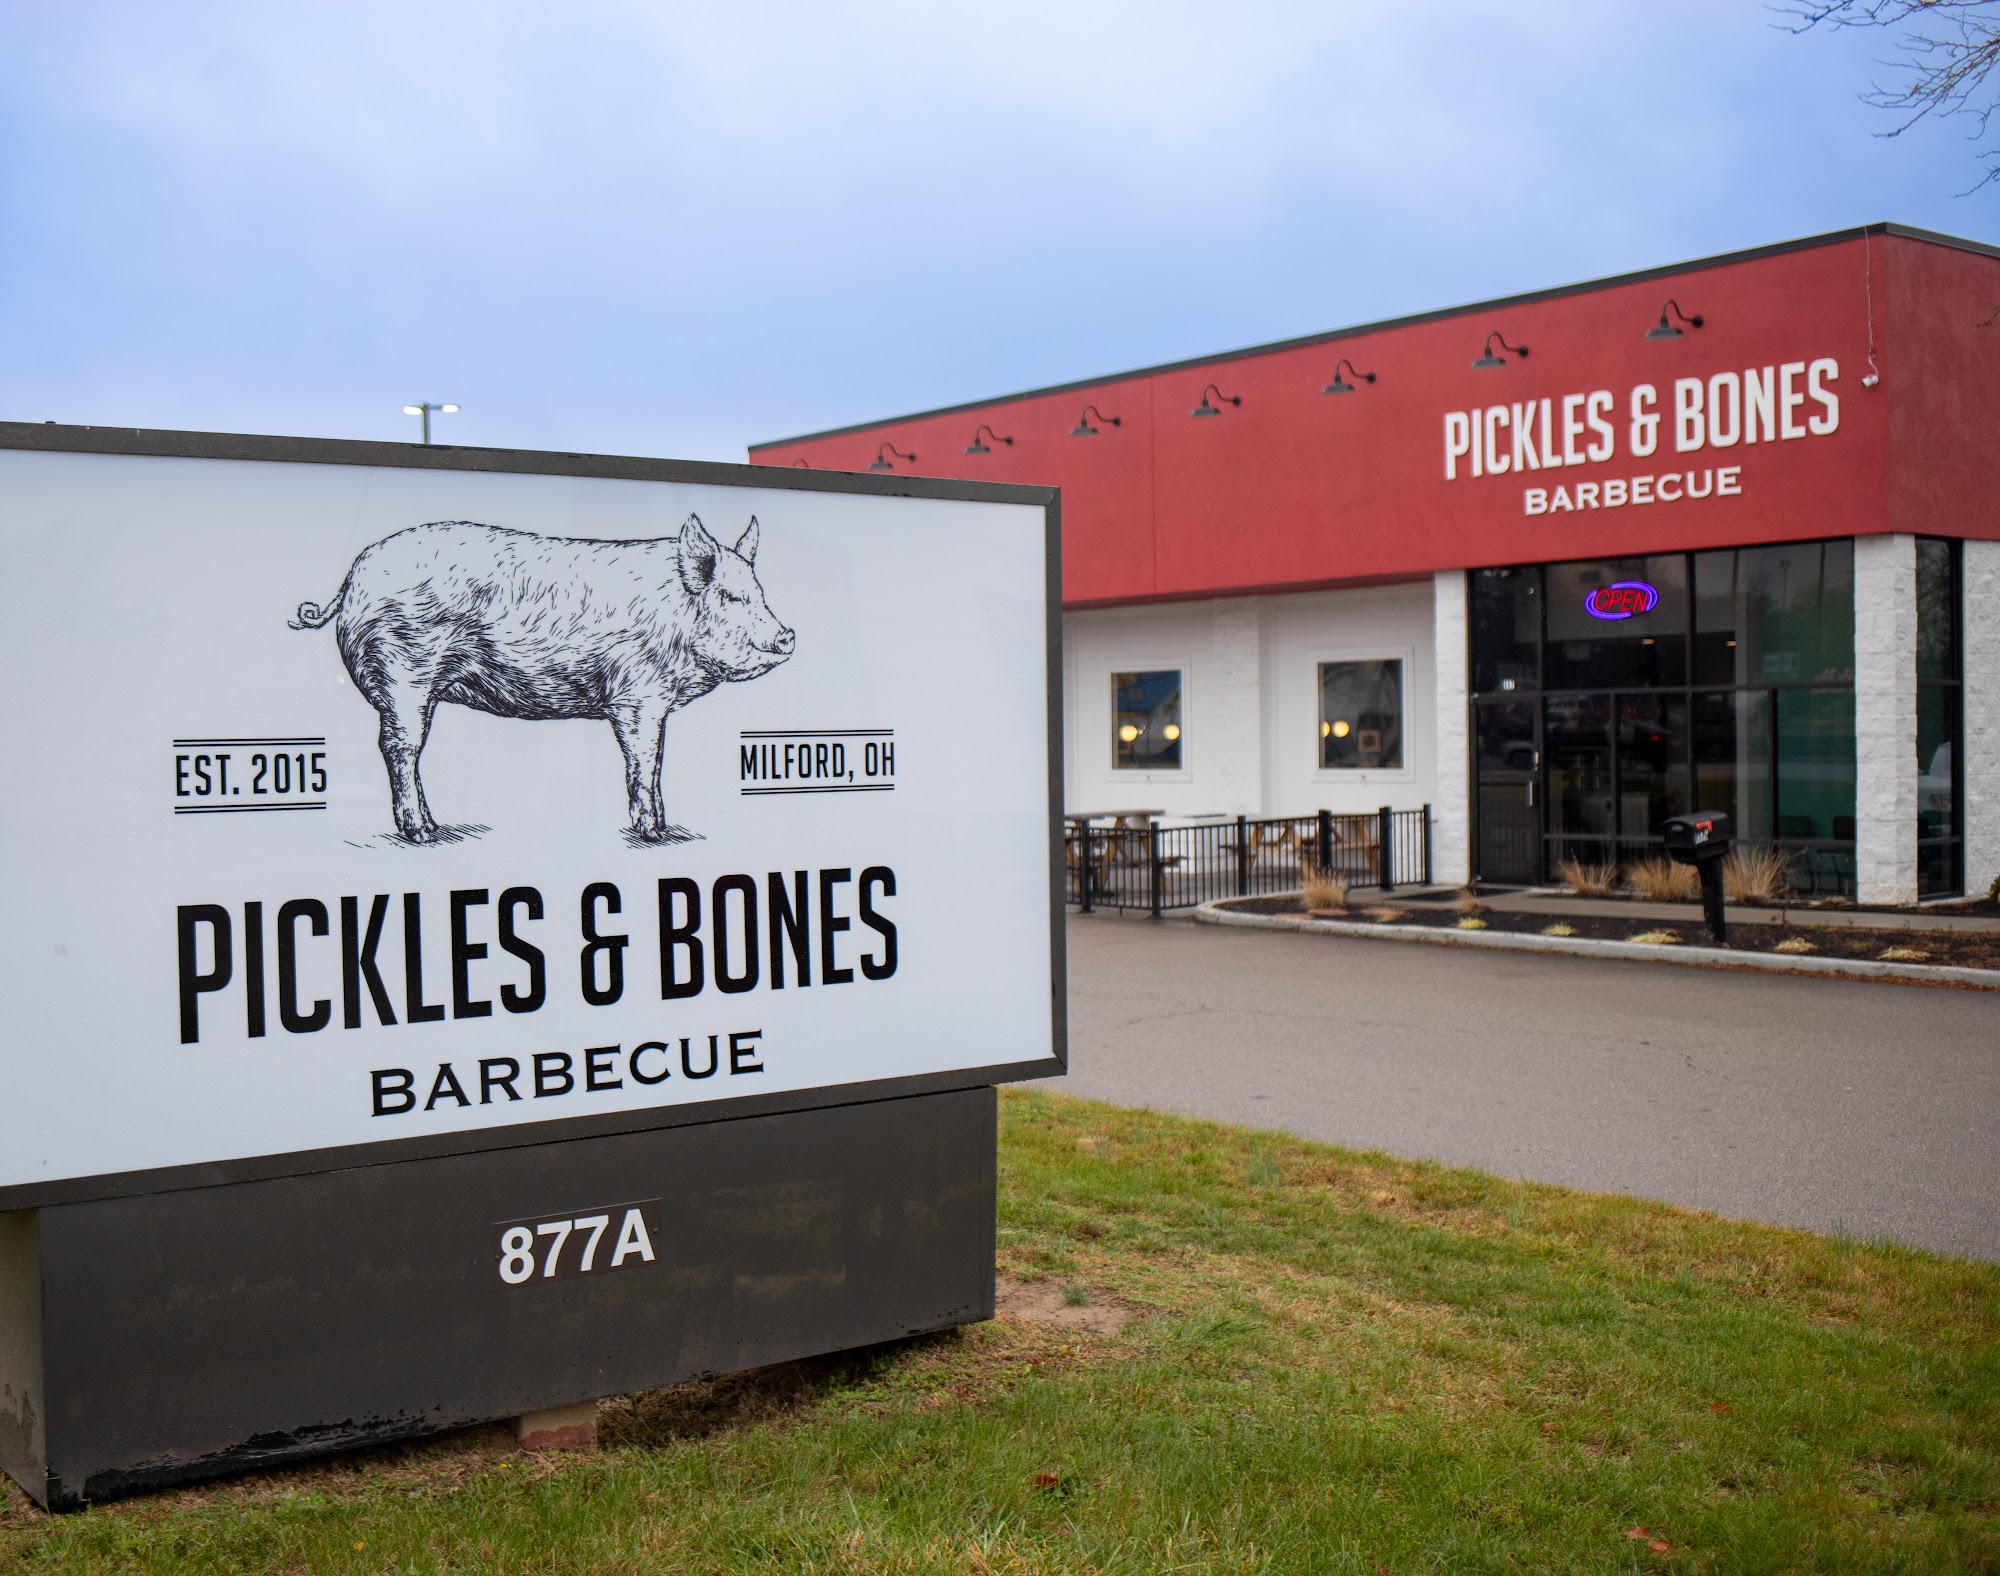 Pickles & Bones Barbecue and Catering